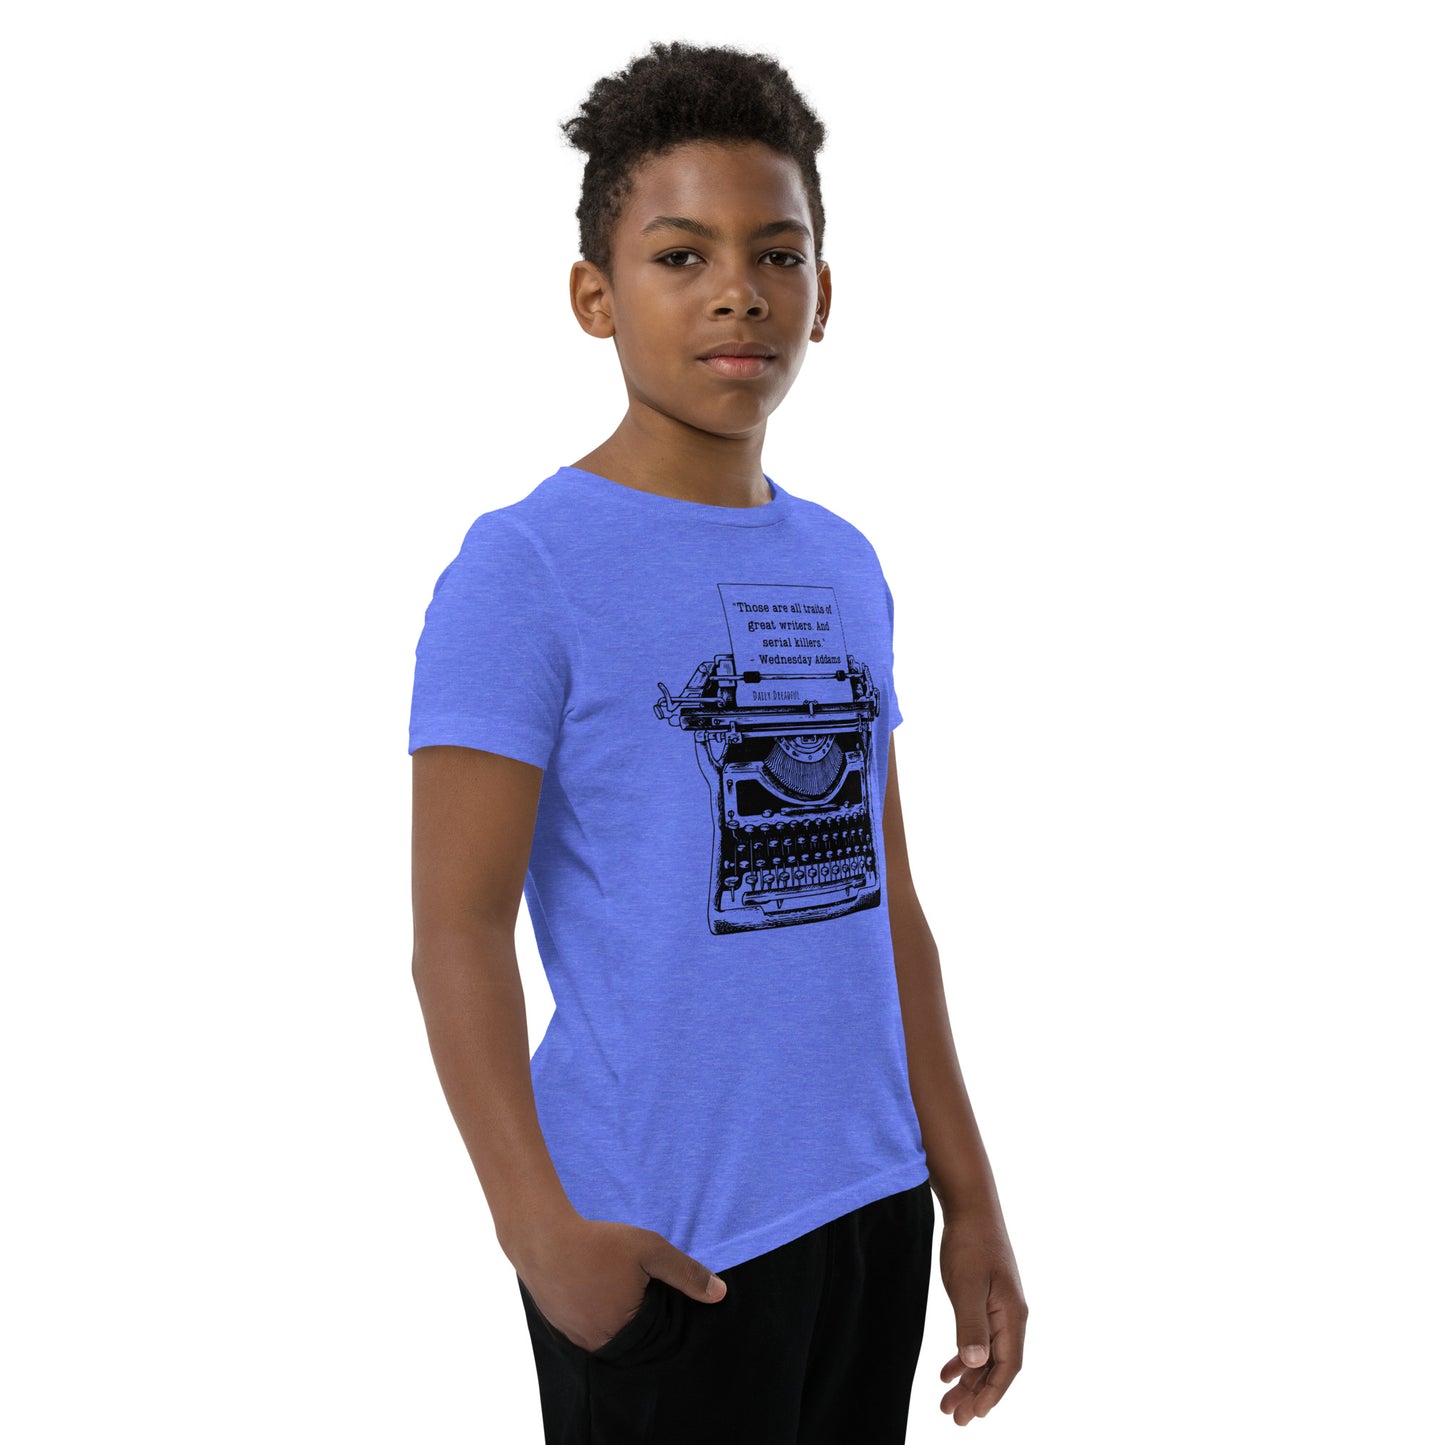 heather columbia "Wednesday Addams Typewriter" Youth Short Sleeve T-Shirt from Daily Dreadful